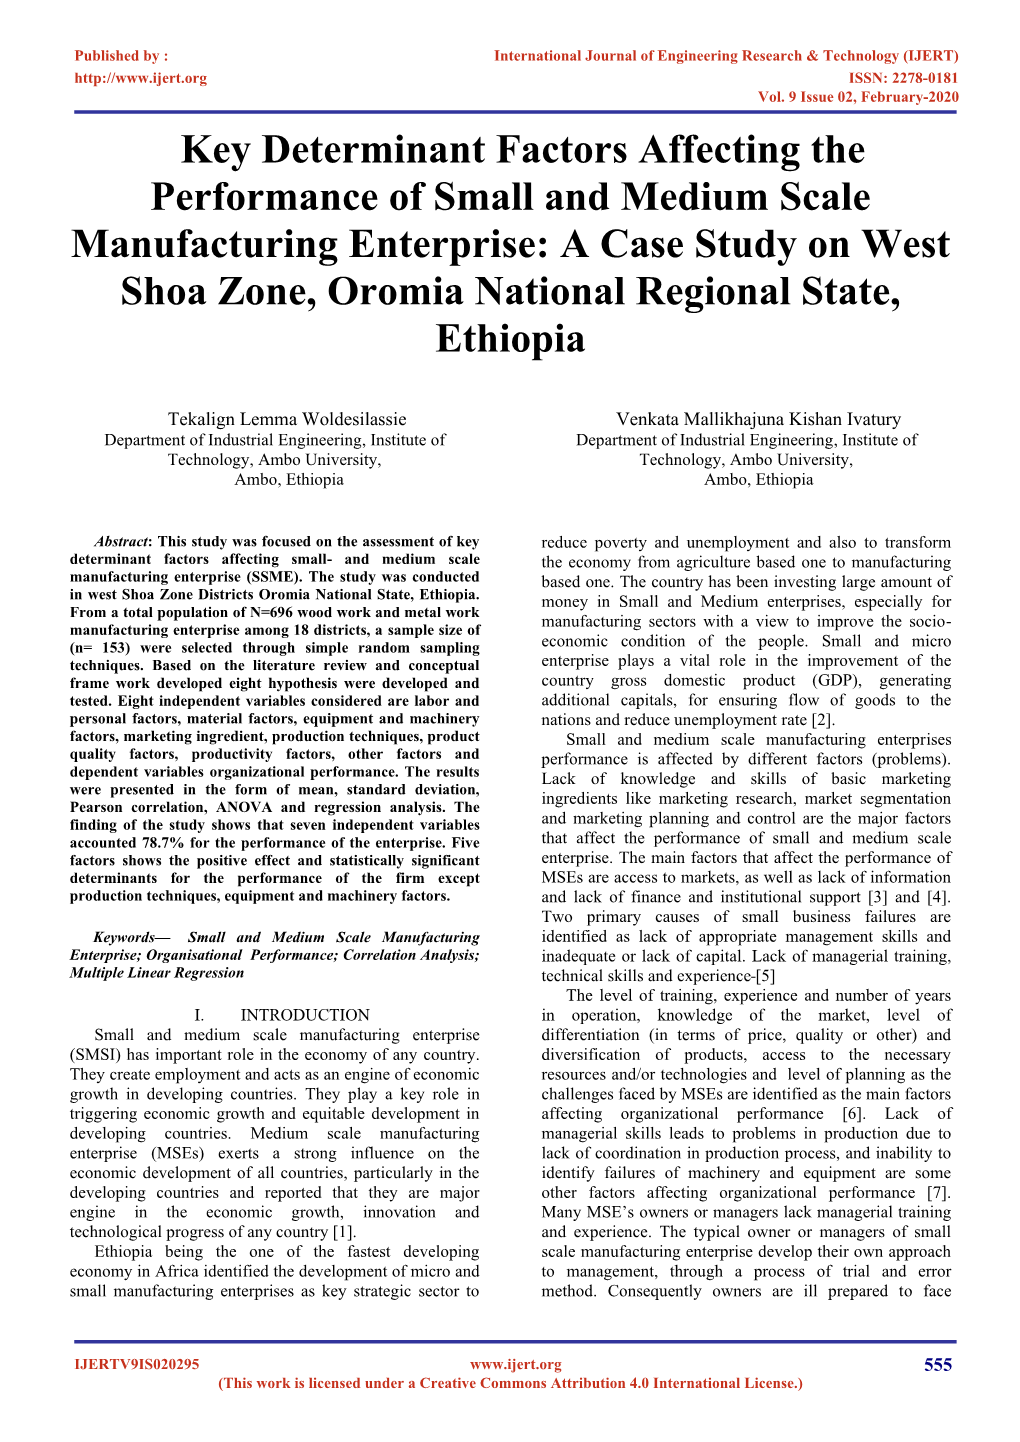 Key Determinant Factors Affecting the Performance of Small and Medium Scale Manufacturing Enterprise